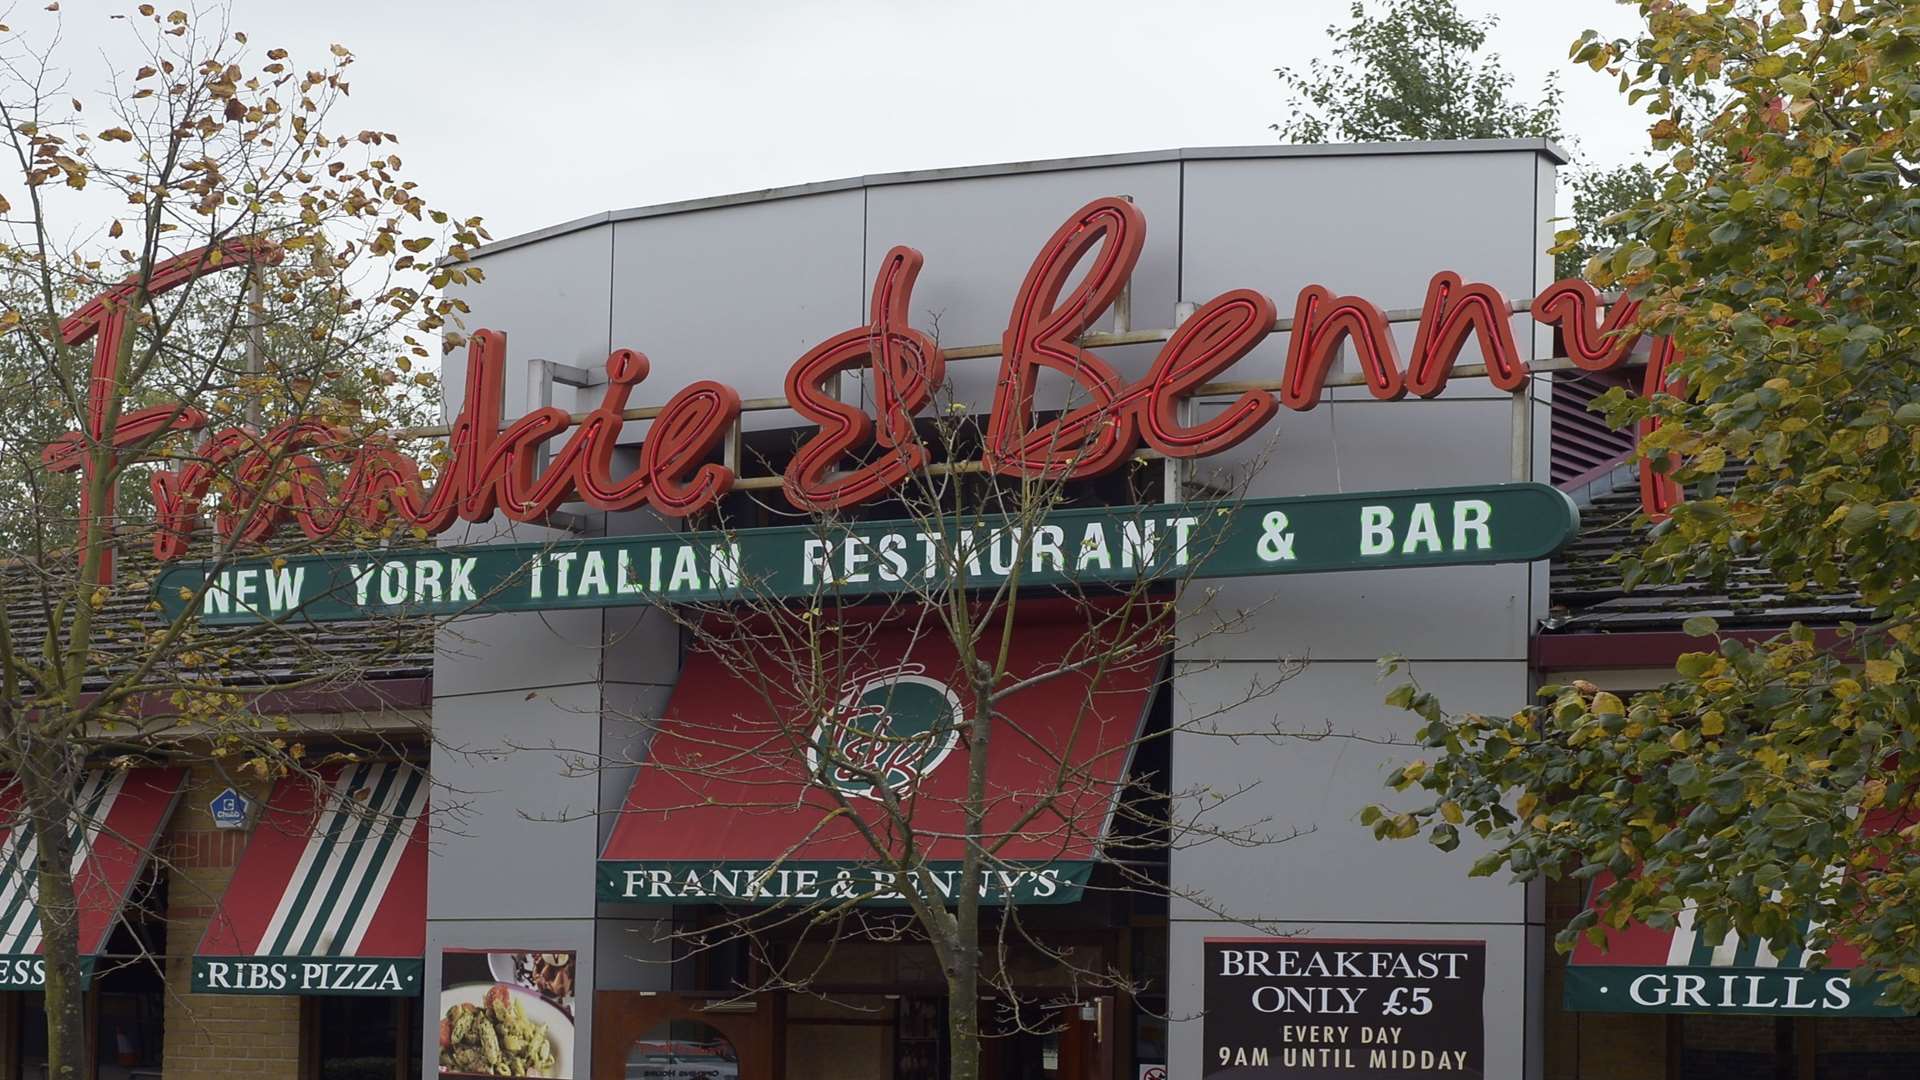 Frankie and Benny's have several outlets in Kent